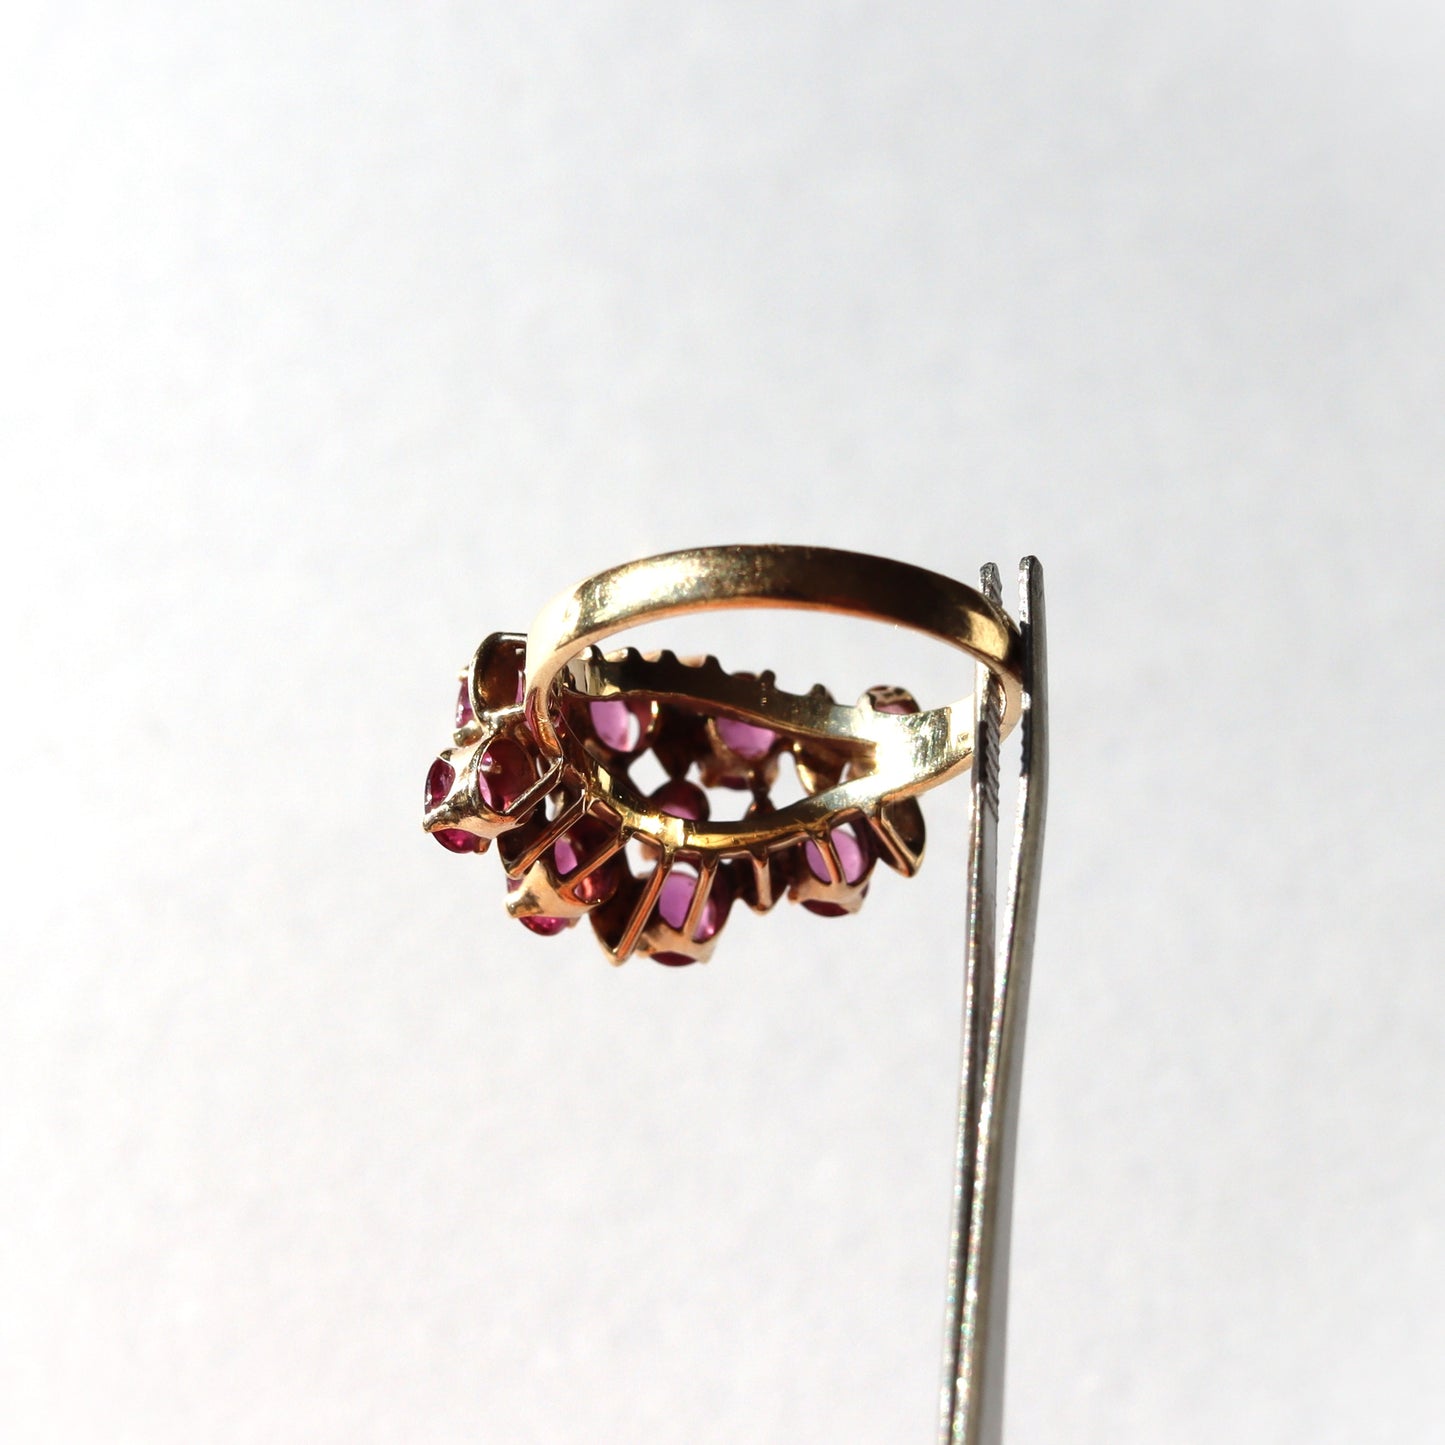 Mid Century Modern 14k Gold 1970's Ruby Cluster Statement Cocktail Ring sz 5.25